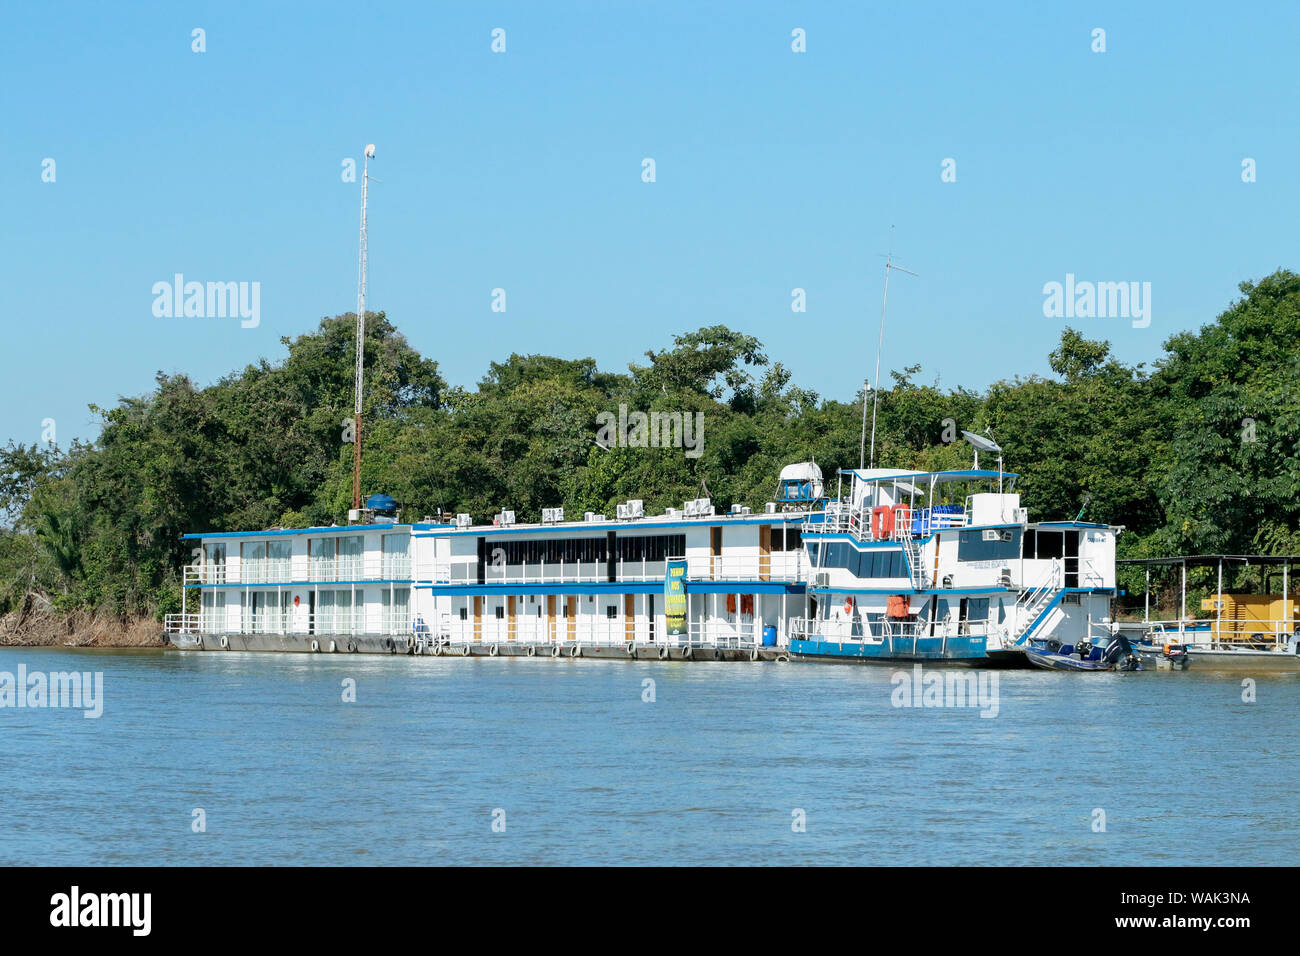 Floating Hotel, or Flotel, on the Cuiaba River. (Editorial Use Only) Stock Photo